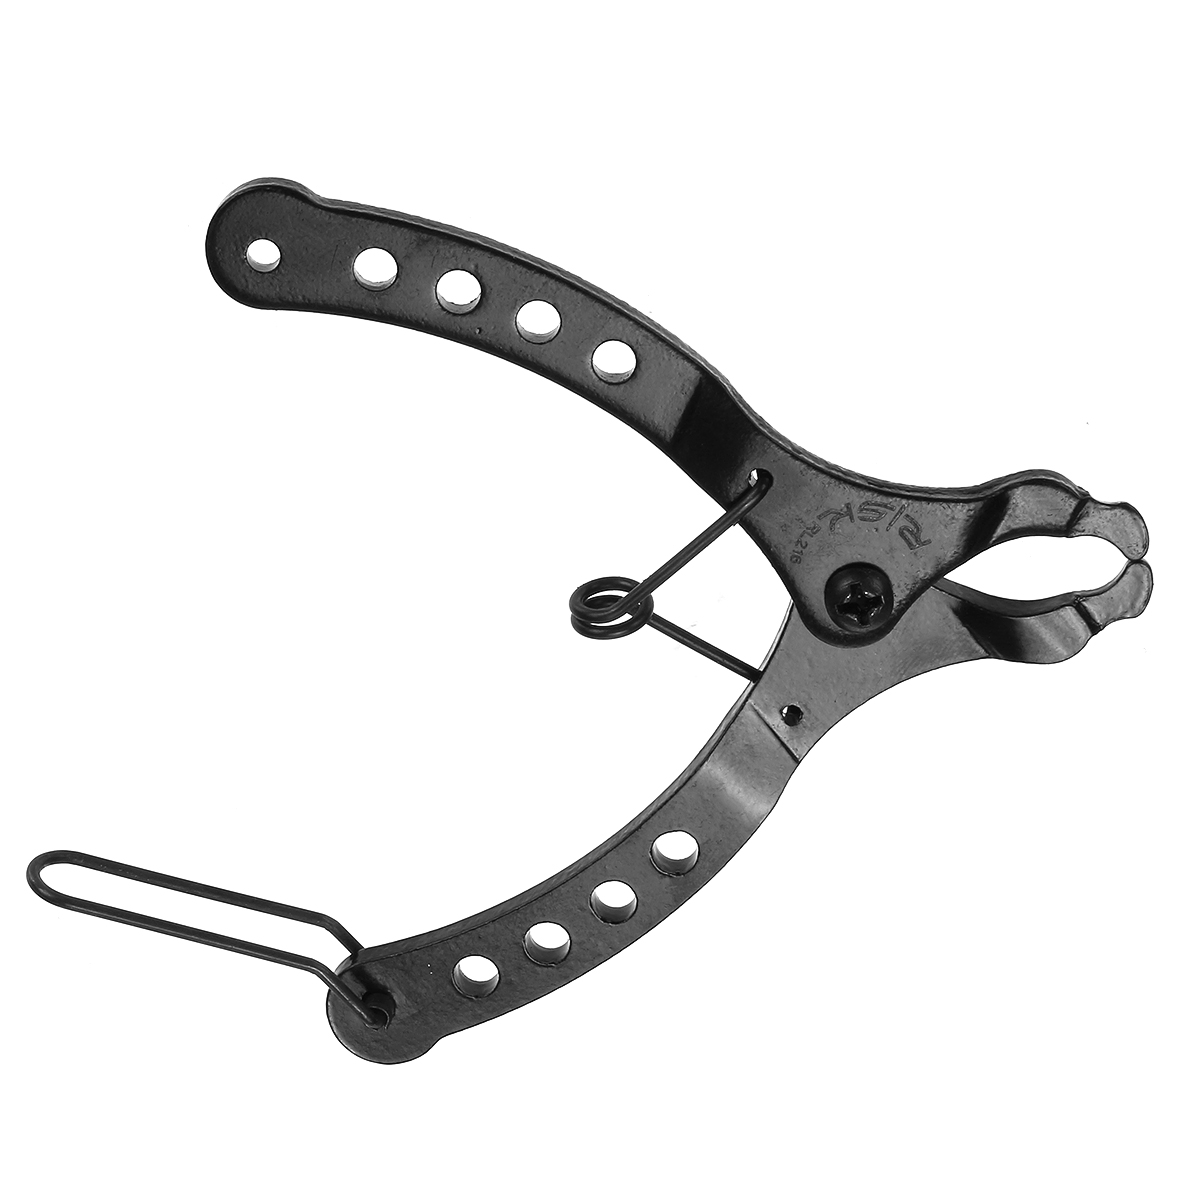 Mini-Chain-Quick-Link-Tool-Bicycle-Plier-Mountain-Bike-Chains-Clamp-Buckle-1749898-10